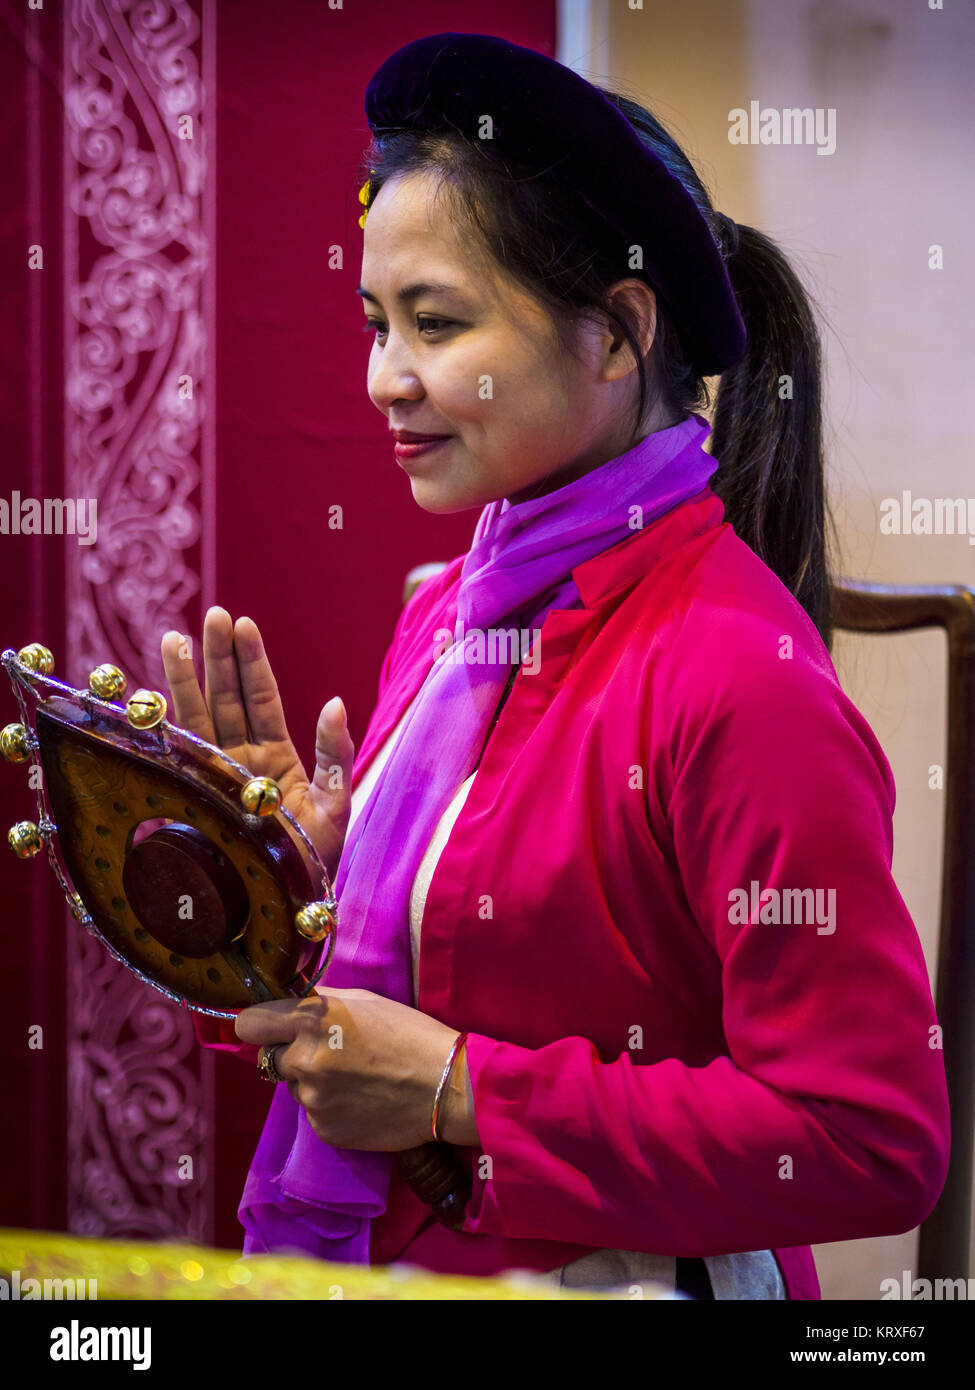 Hanoi, Ha Noi, Vietnam. 21st Dec, 2017. A traditional musician performs in the Temple of Literature, a Confucian temple dedicated to learning and the humanities. It was also Vietnam's first national university. The temple was built in 1070 at the time of Emperor LÃ½ ThÃ¡nh TÃ´ng. It is one of several temples in Vietnam which is dedicated to Confucius, sages and scholars. Credit: Jack Kurtz/ZUMA Wire/Alamy Live News Stock Photo